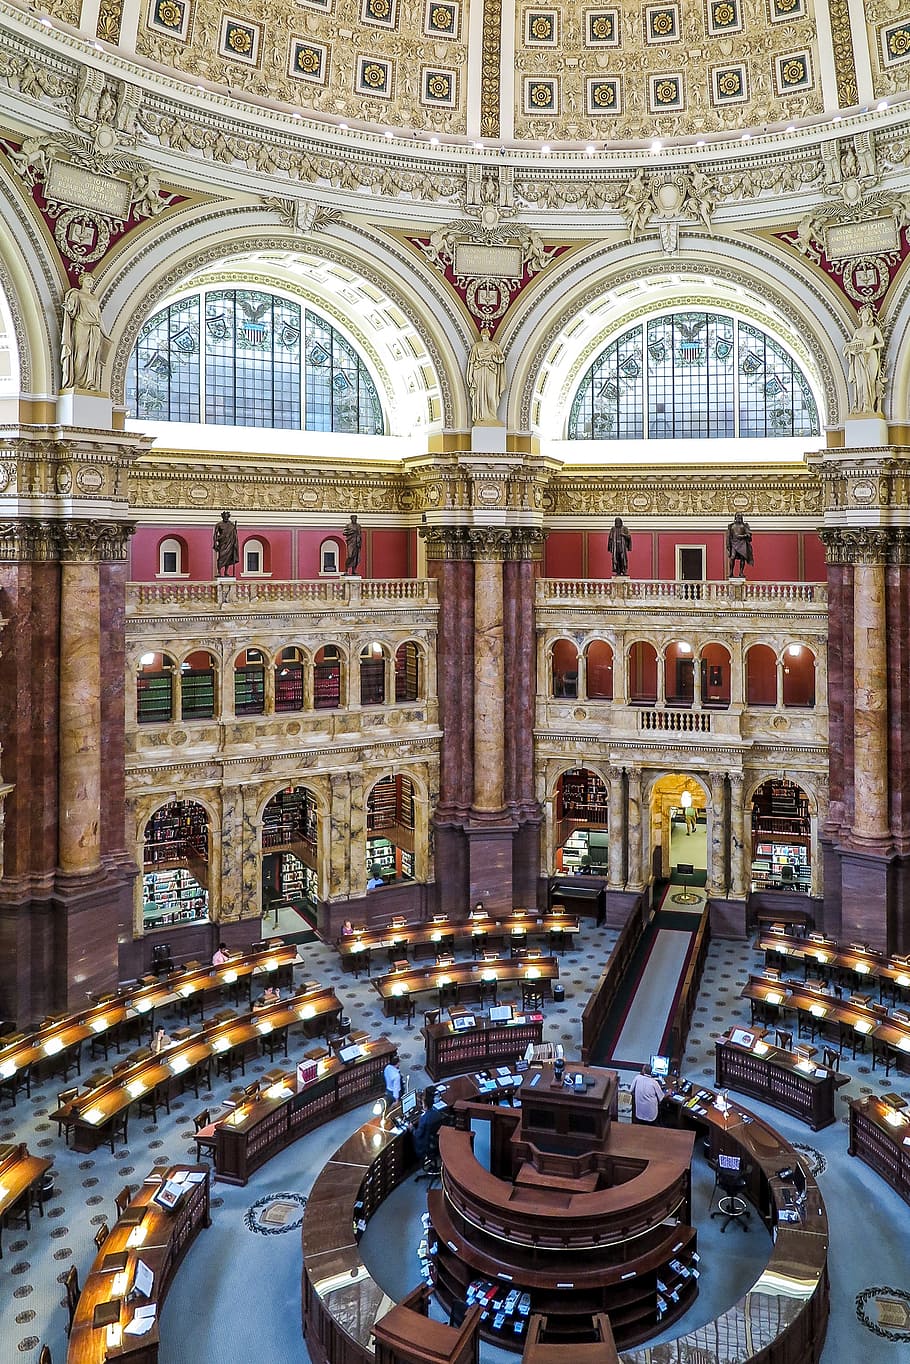 main, reading room, library, congress., america, architectural, architecture, beautiful, blue, book